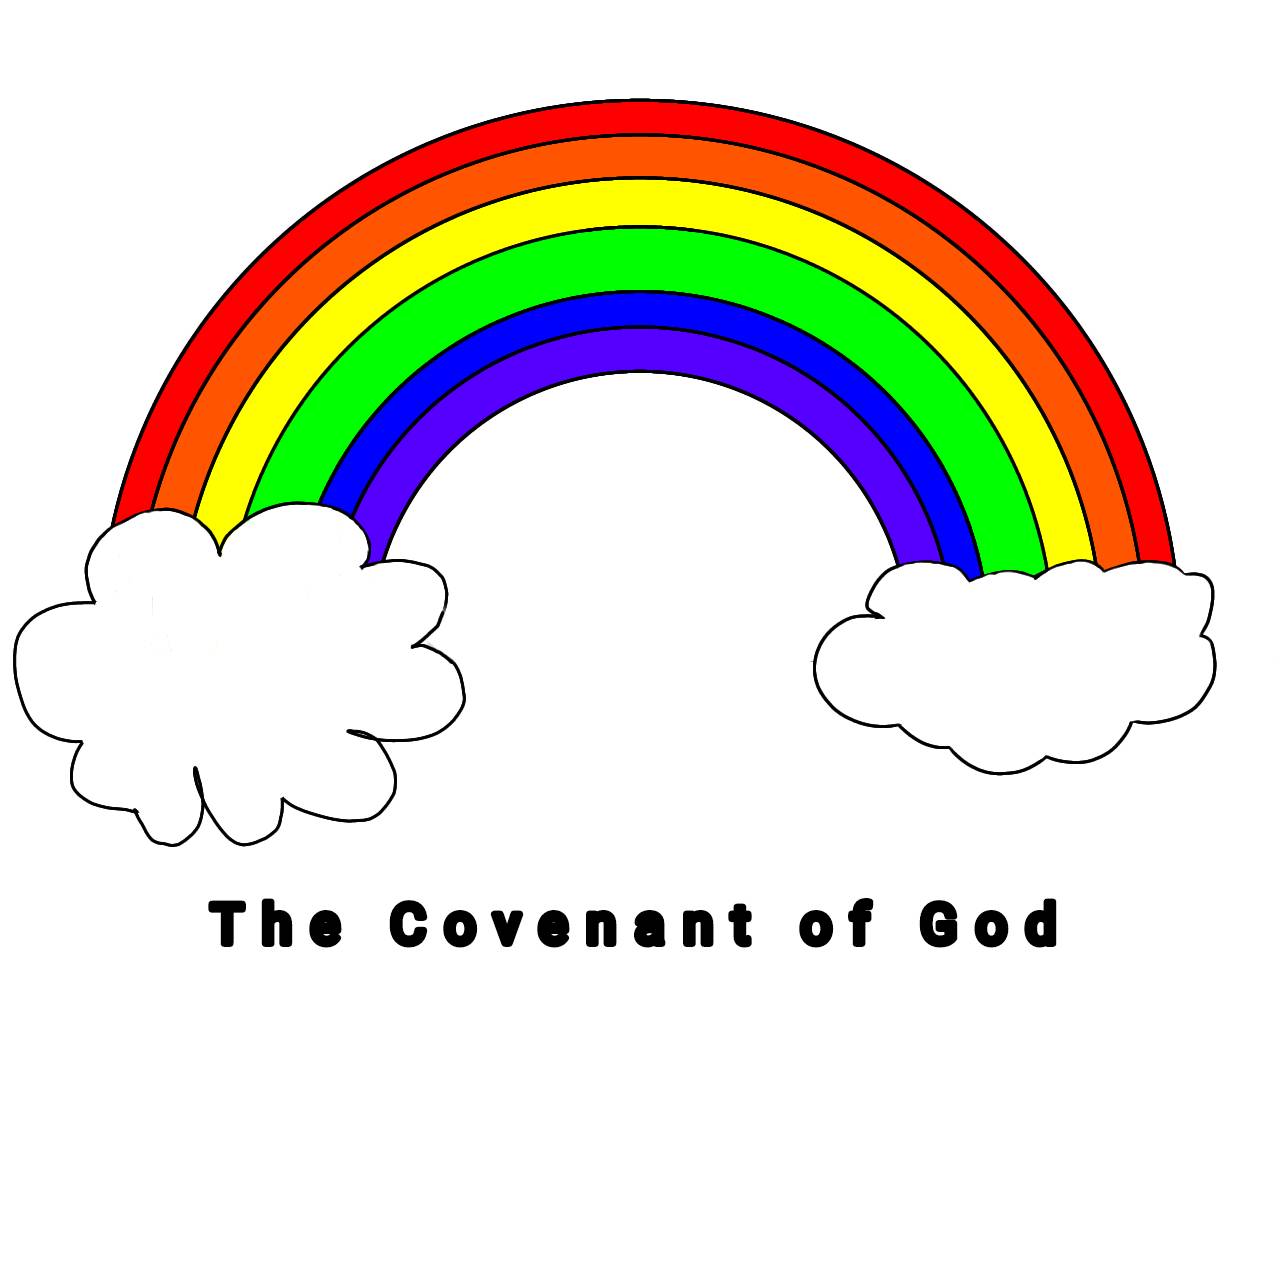 How Is the Rainbow a Sign of the Covenant?